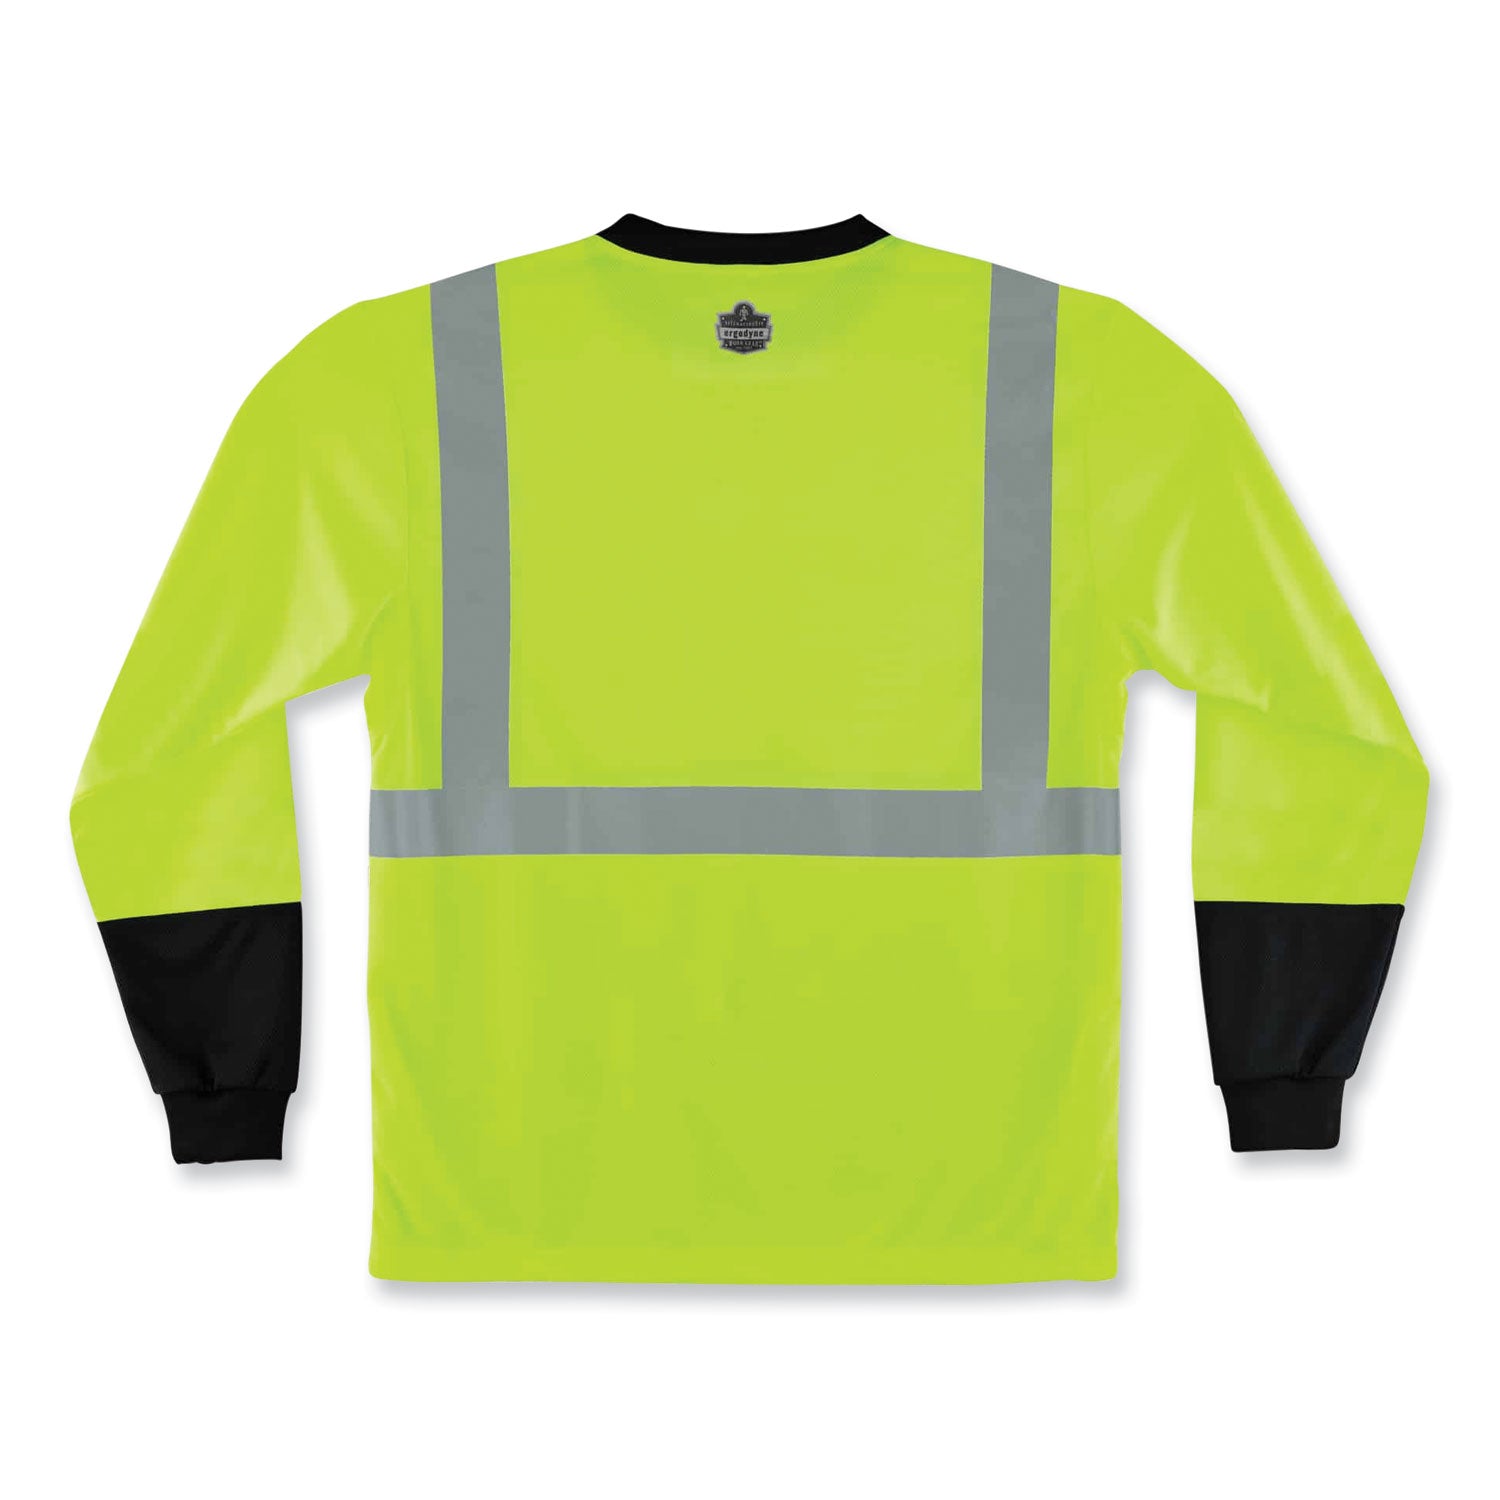 glowear-8291bk-type-r-class-2-black-front-long-sleeve-t-shirt-polyester-medium-lime-ships-in-1-3-business-days_ego22703 - 2